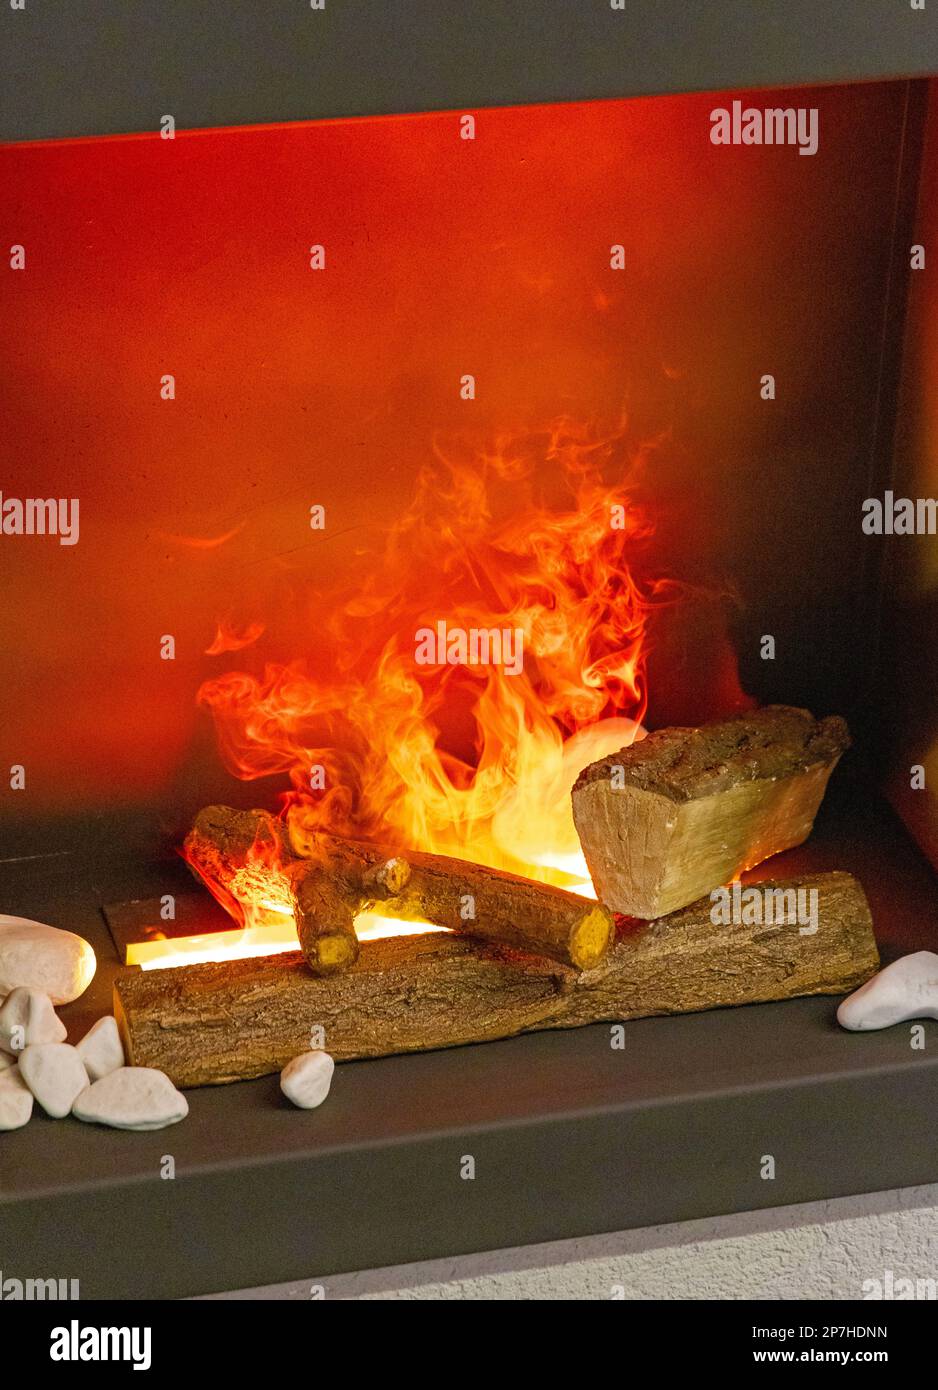 Artificial Ceramic Log Wood Steam Effects in Fireplace Stock Photo